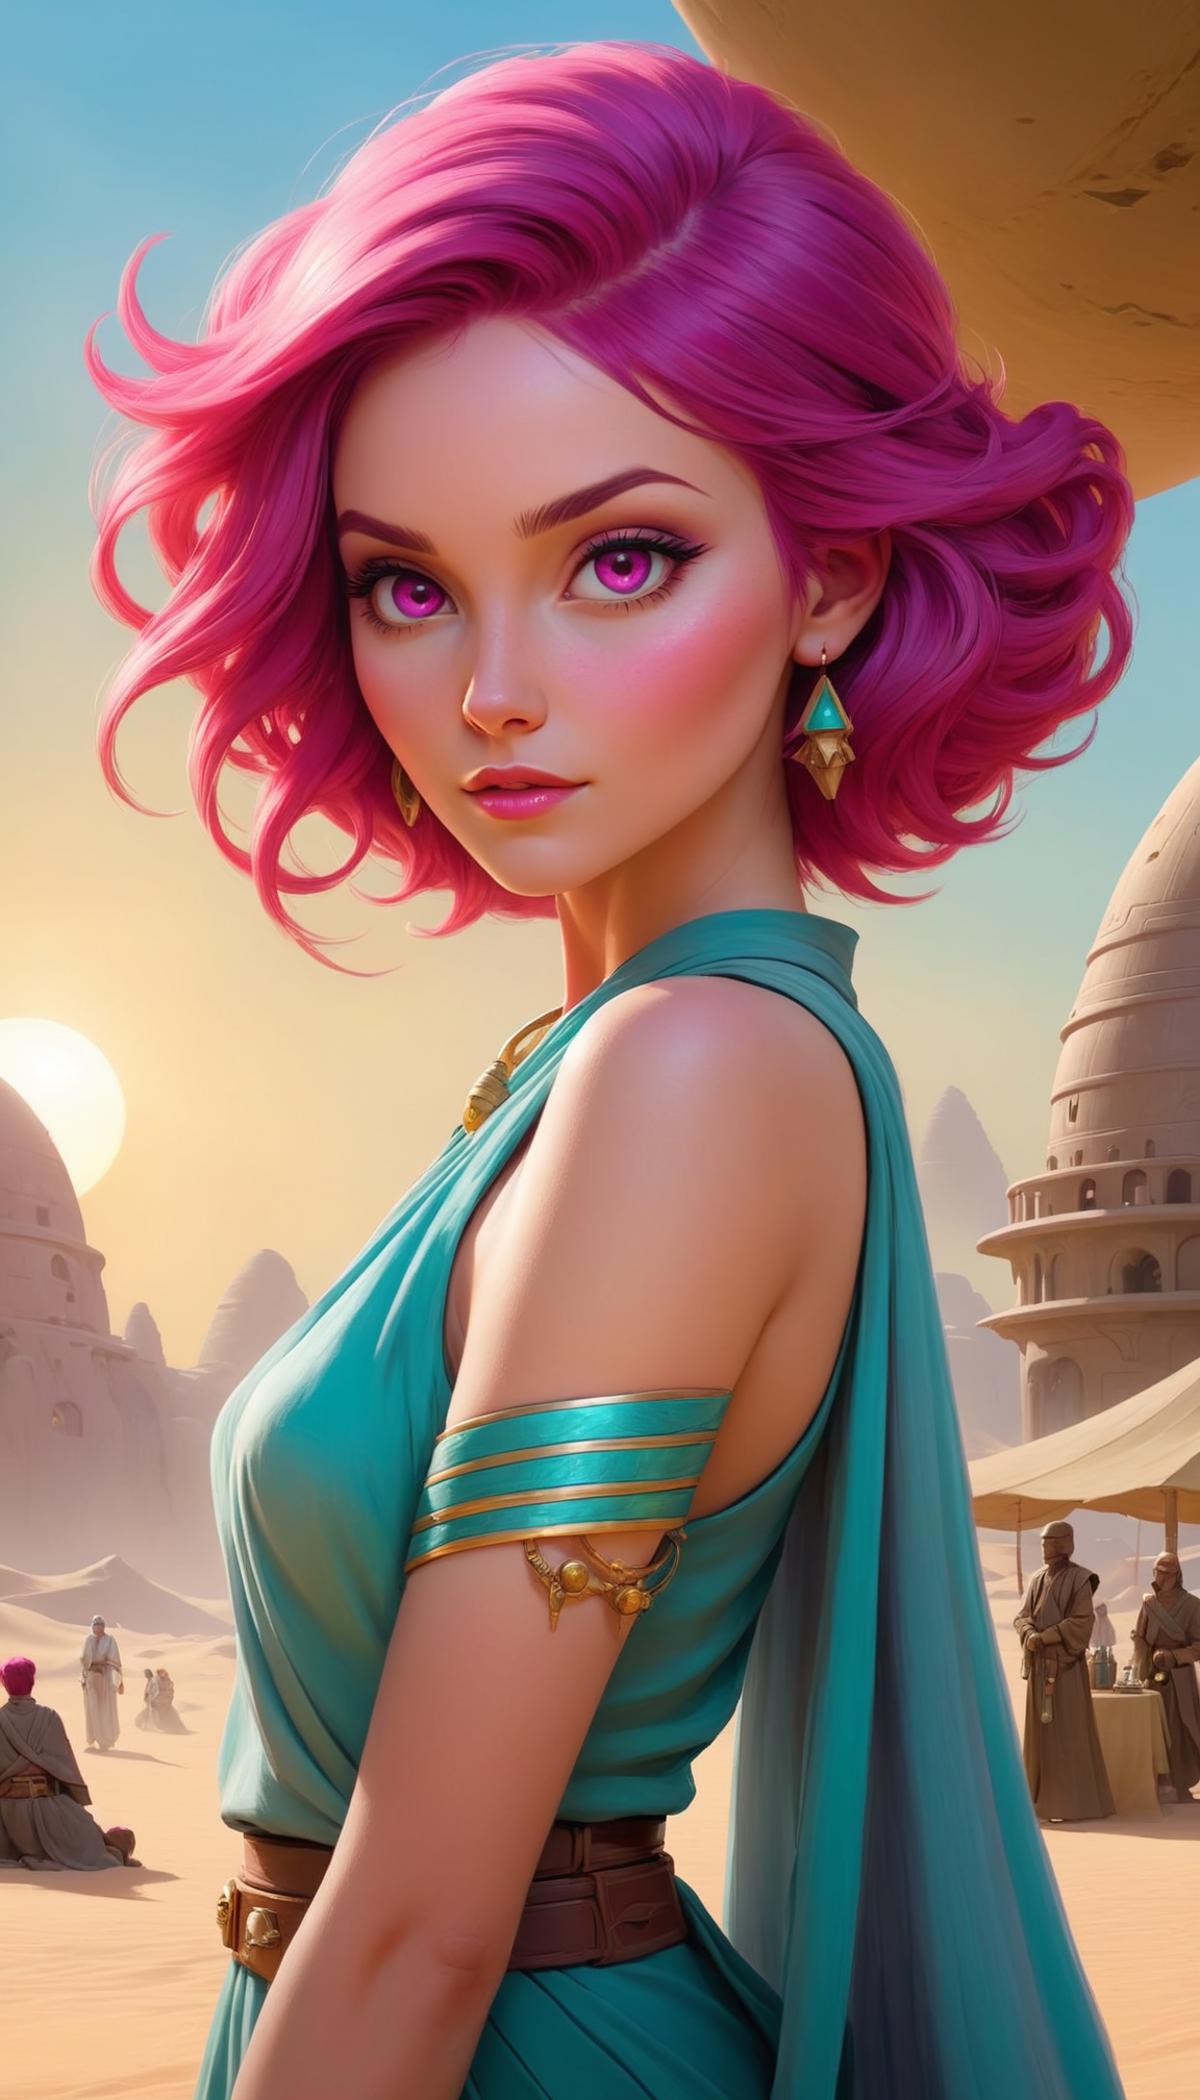 A cartoon woman with pink hair, blue eyes, and a blue dress.